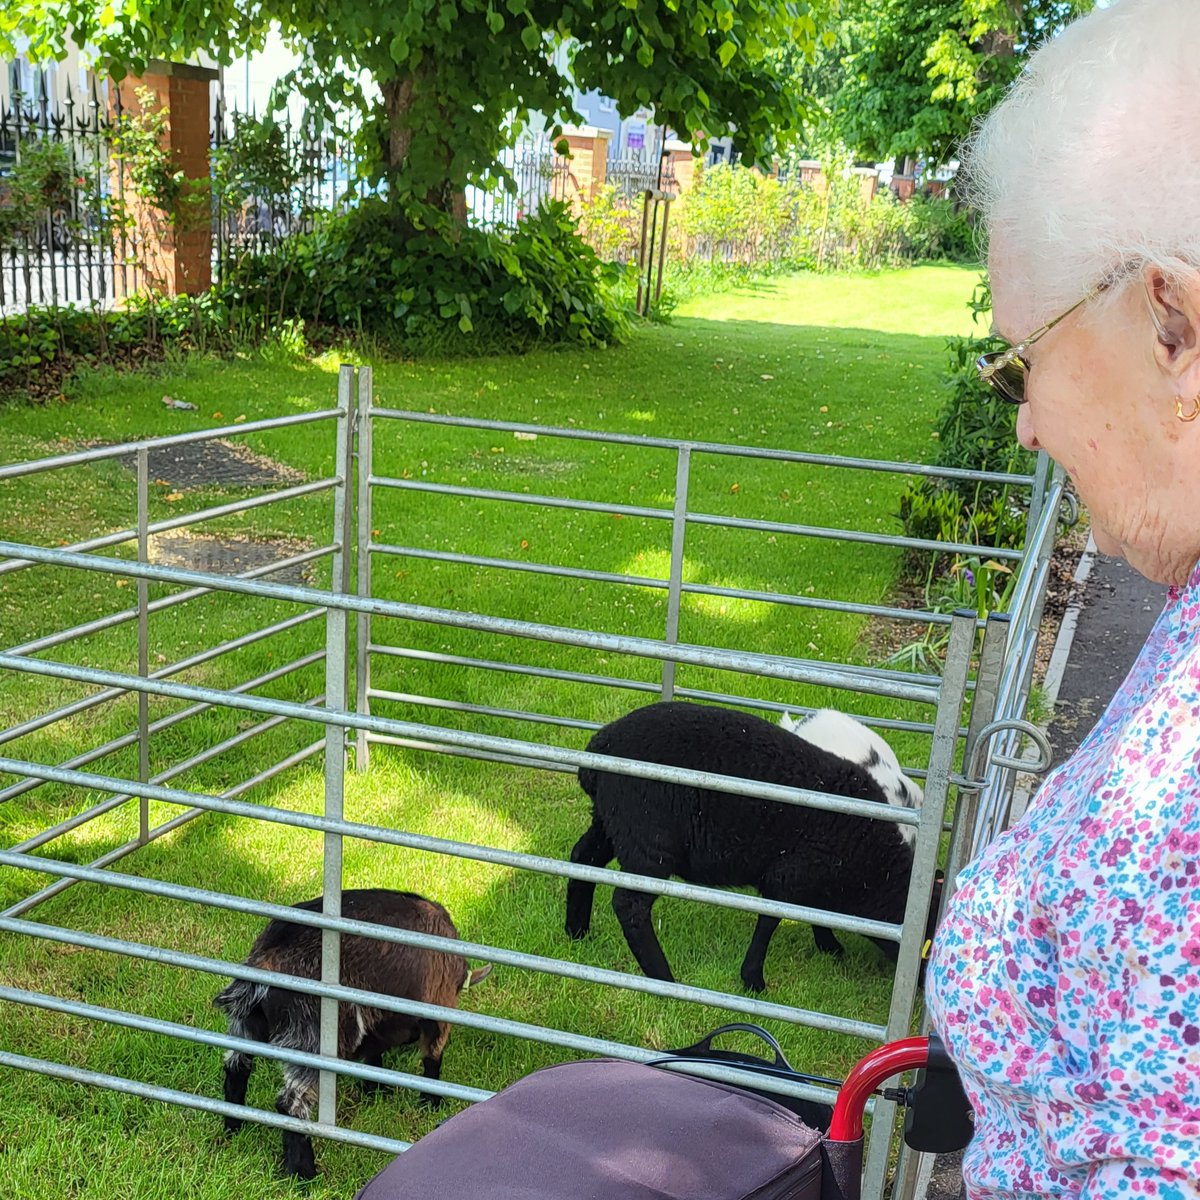 Residents at #AdmiralJellicoeHouse have recently enjoyed semaphore messaging, parachute games in the garden, foil scratch art and a visit to @PHDockyard. Everyone enjoyed interacting with the lamb and baby goats when they visited! Discover more here: bit.ly/3LUZUER